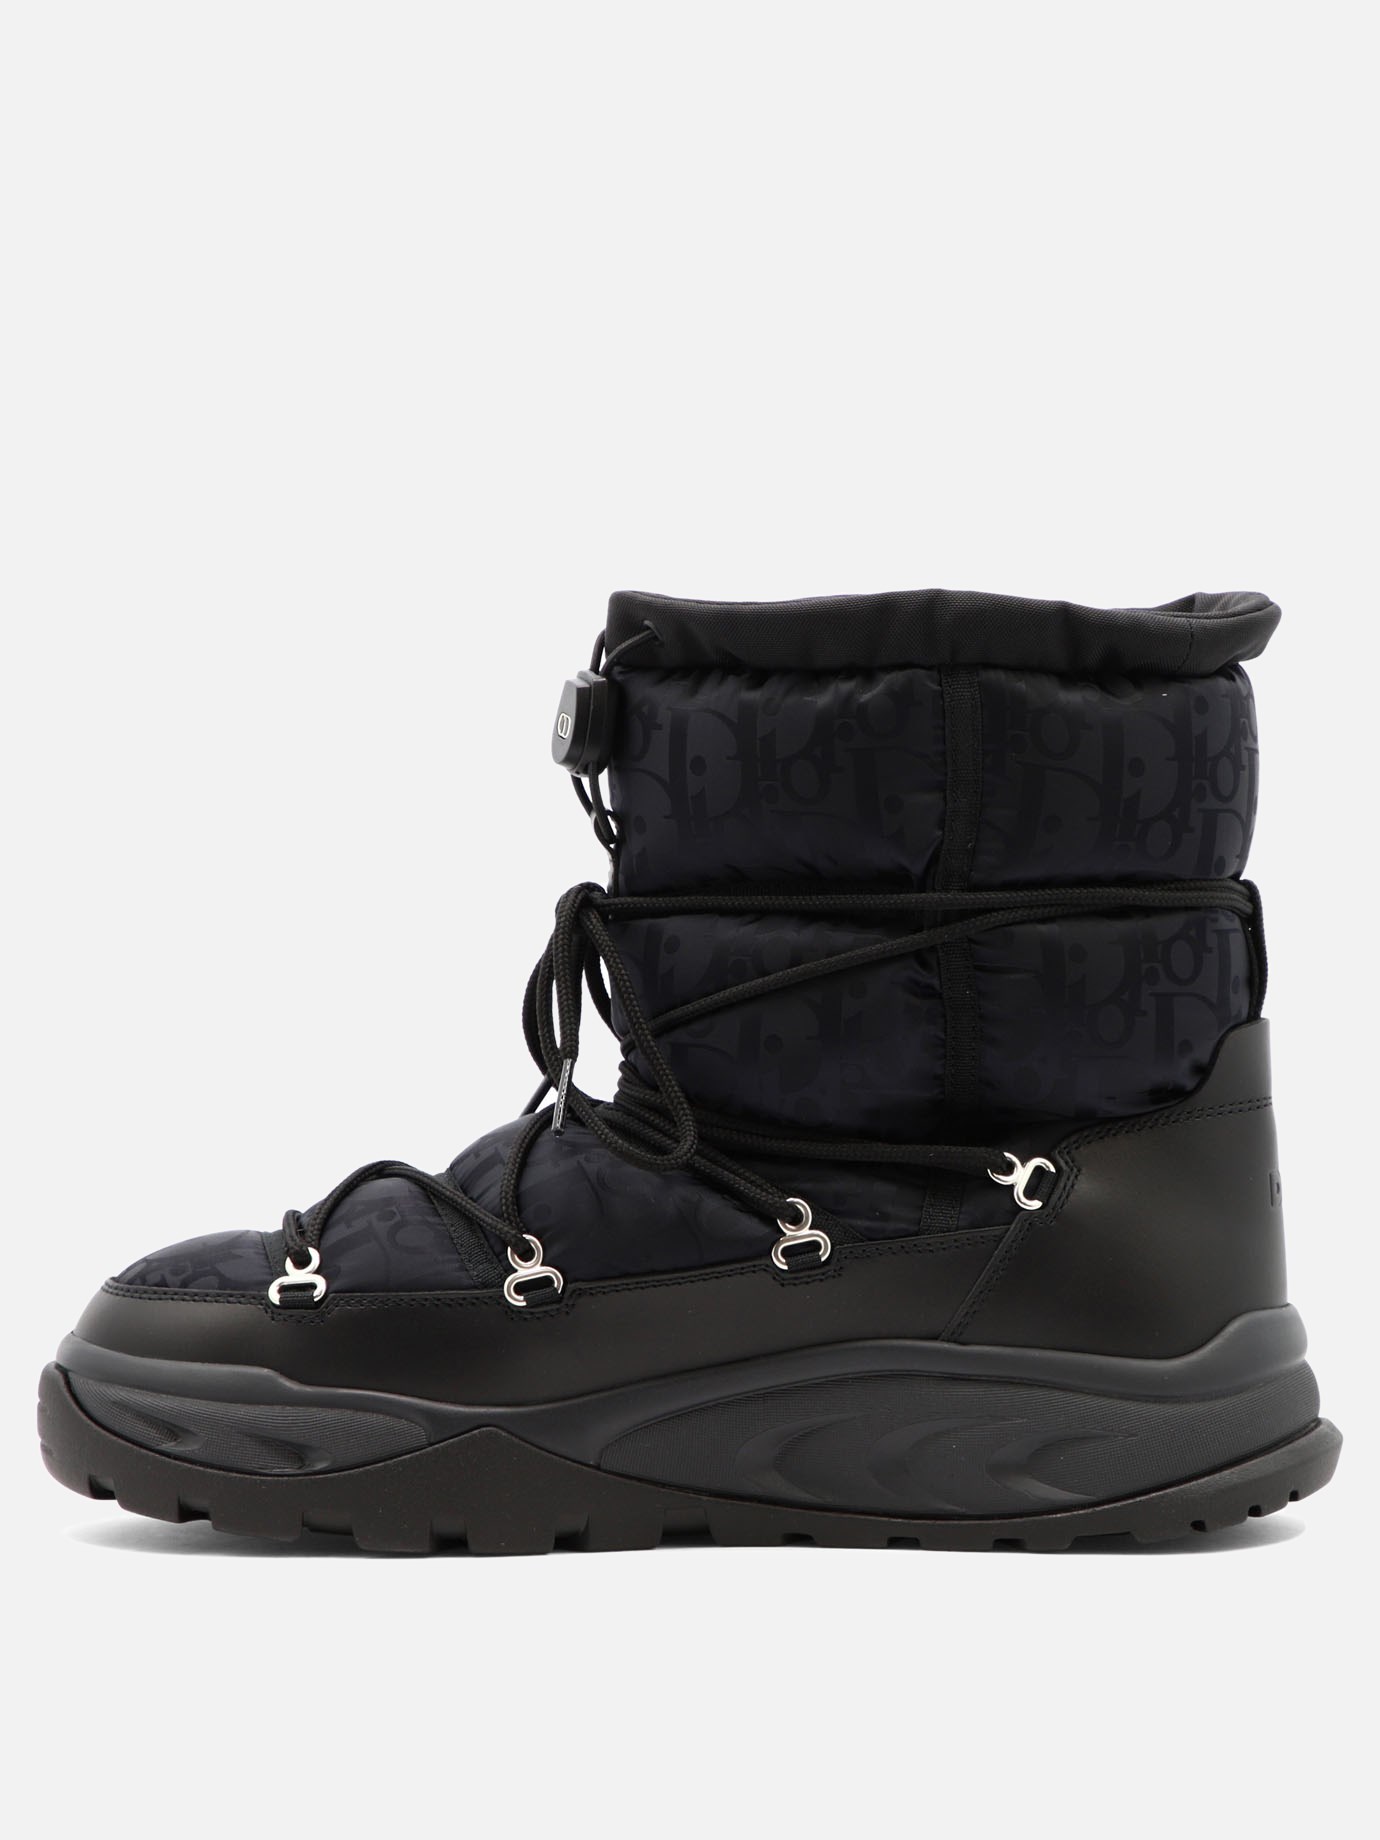  Dior Oblique  snow ankle boots by Dior